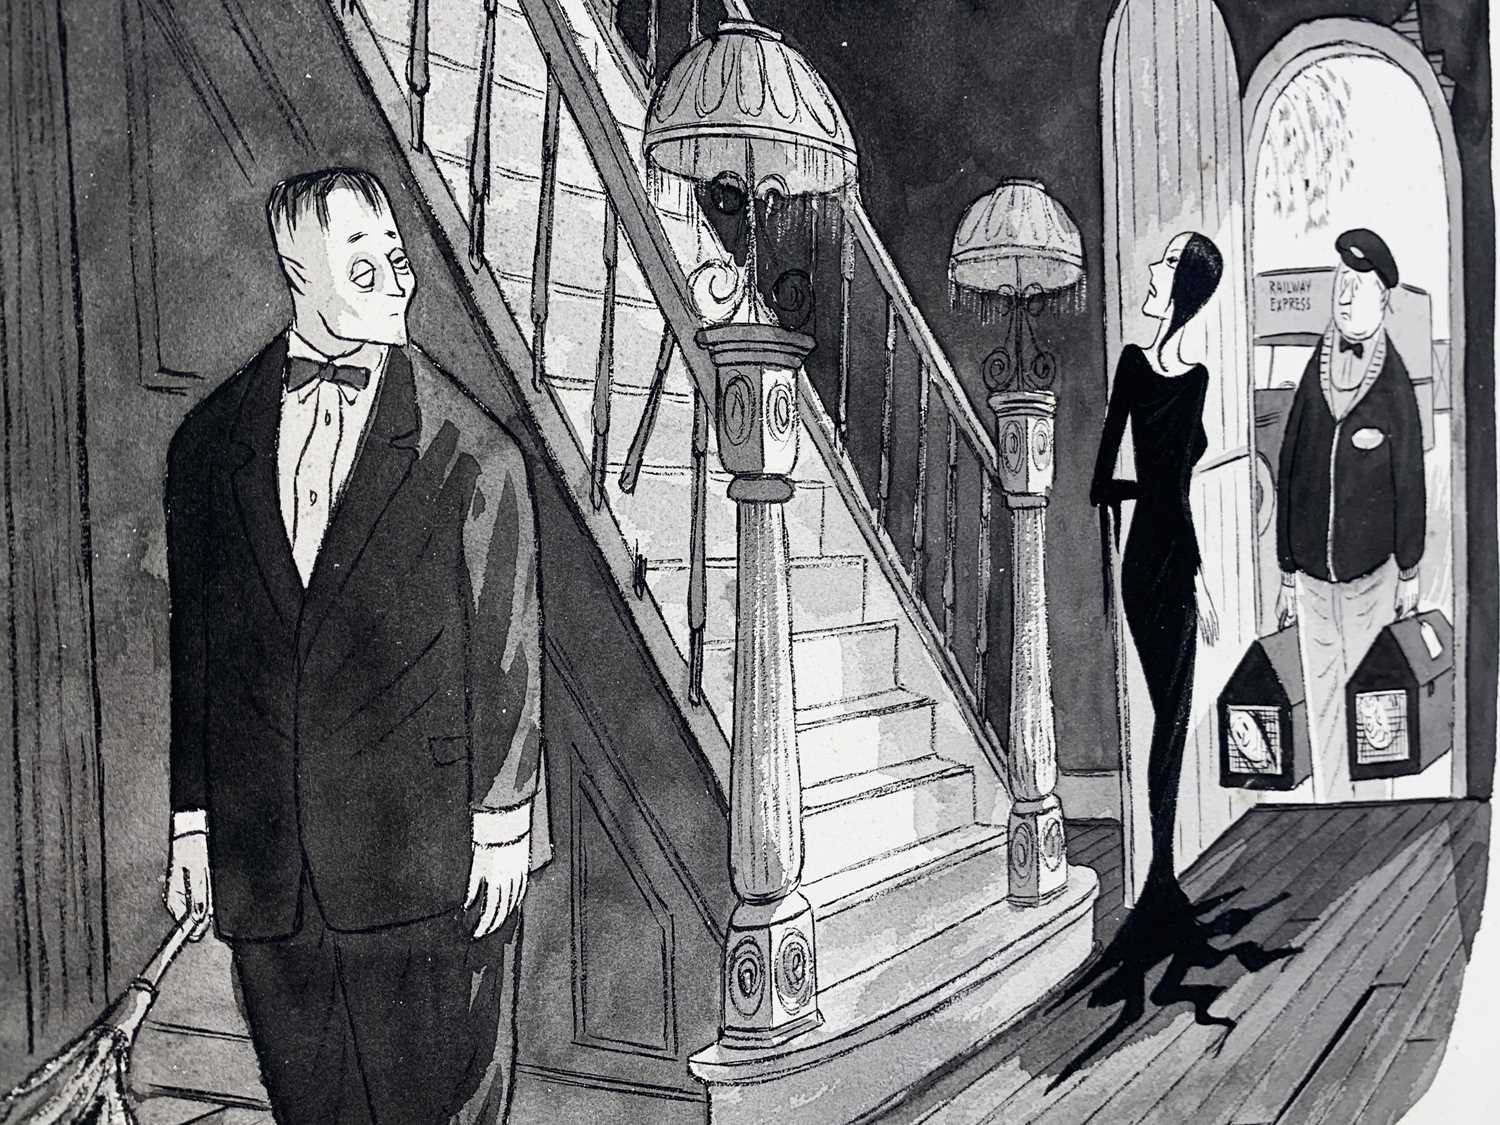 The Addams Family by Charles Addams